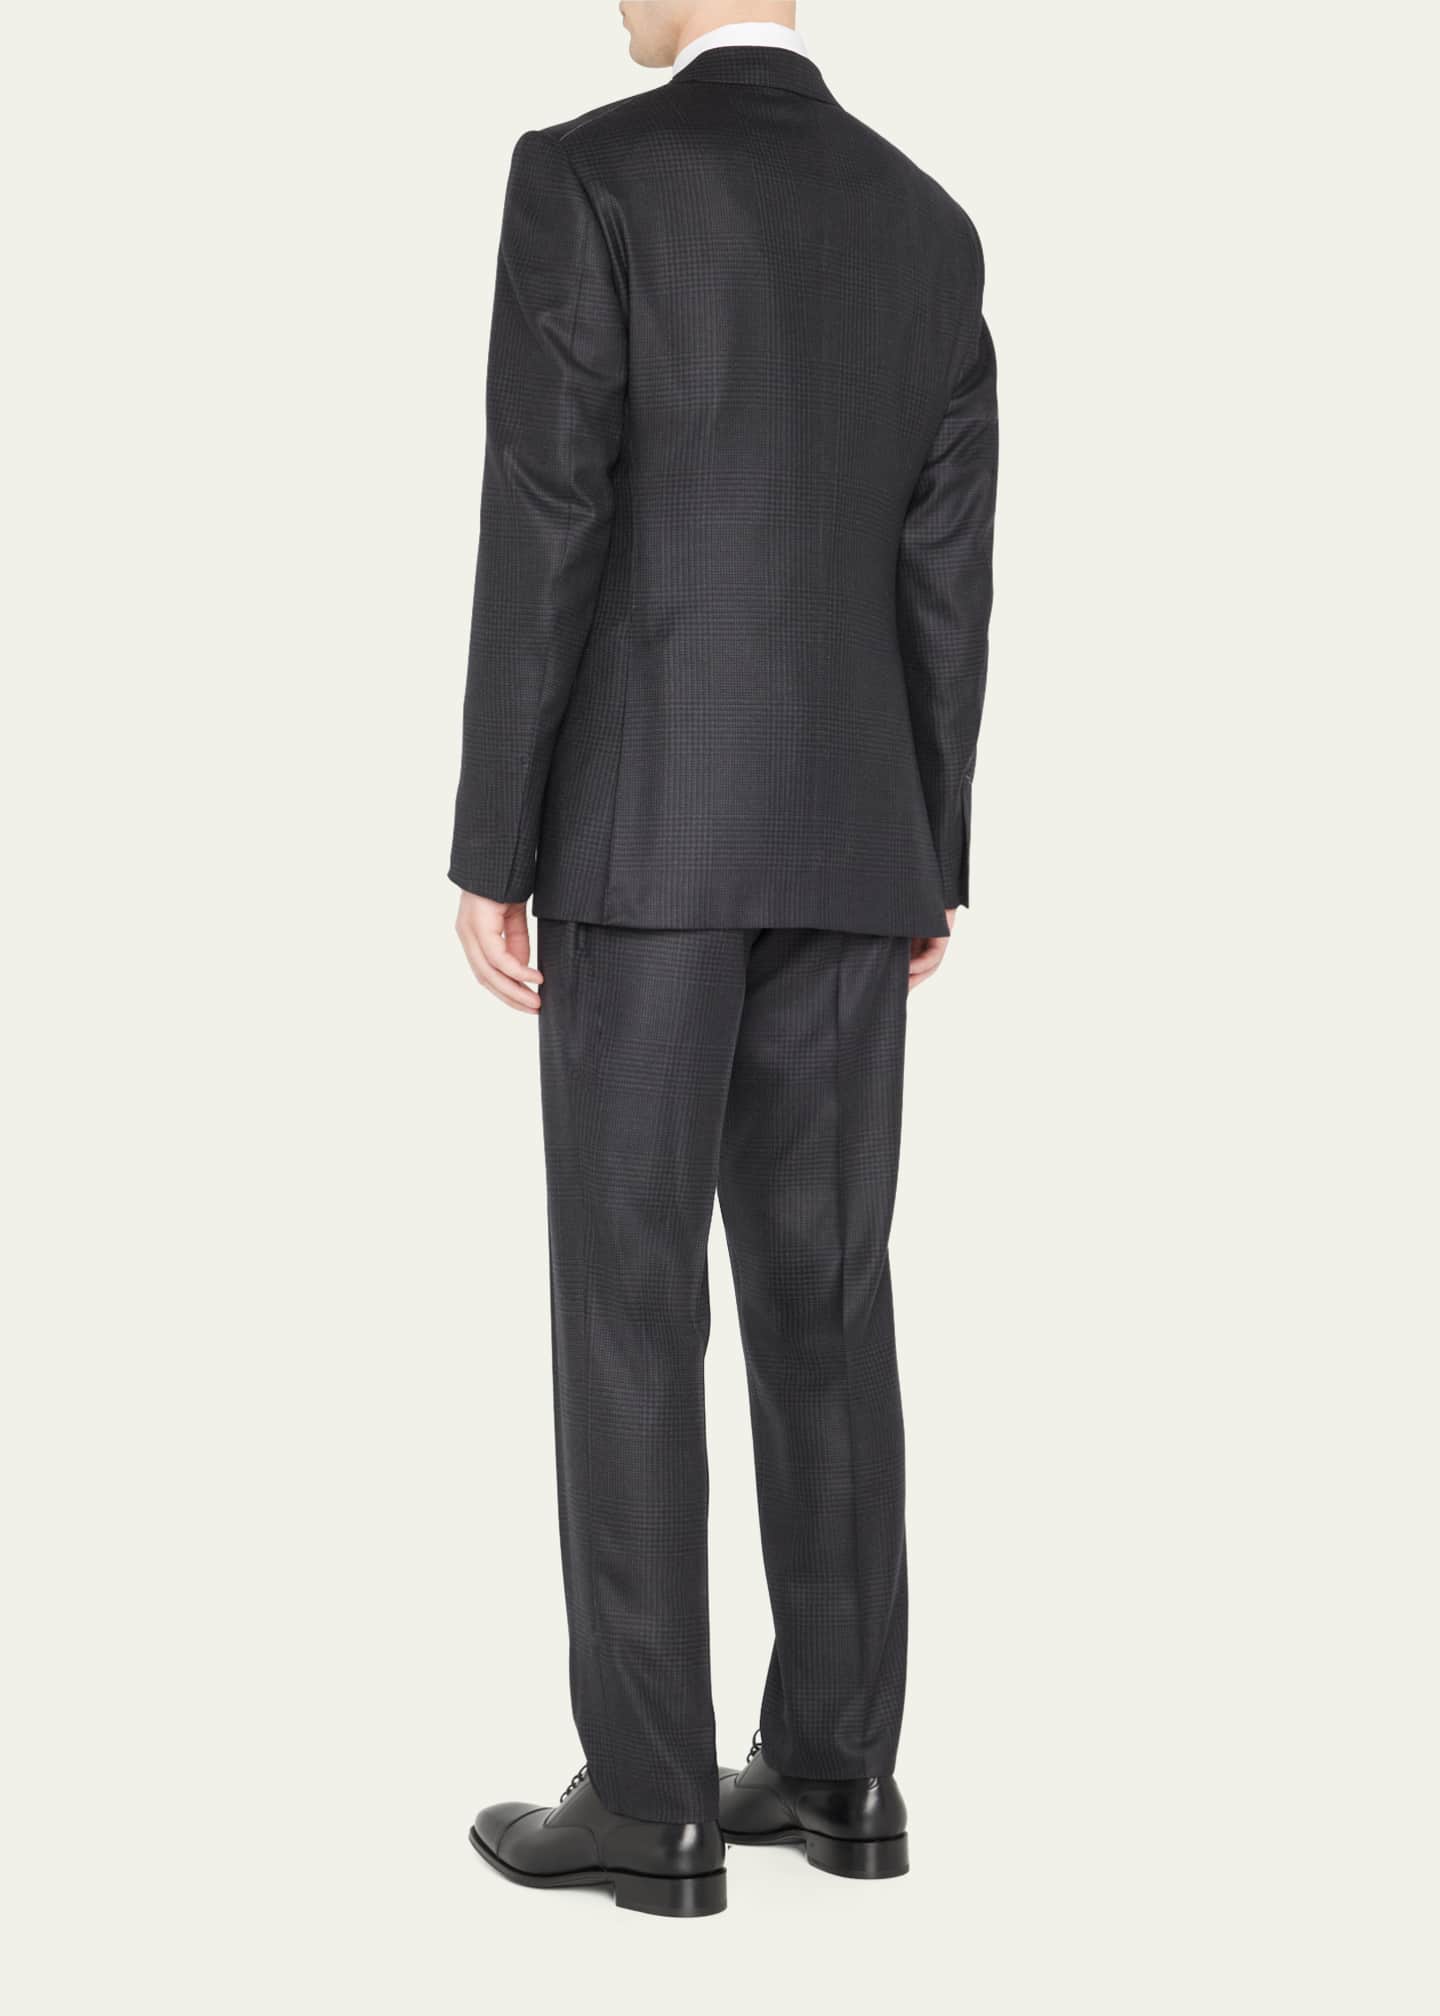 TOM FORD Men's 3-Piece Prince of Wales Suit - Bergdorf Goodman